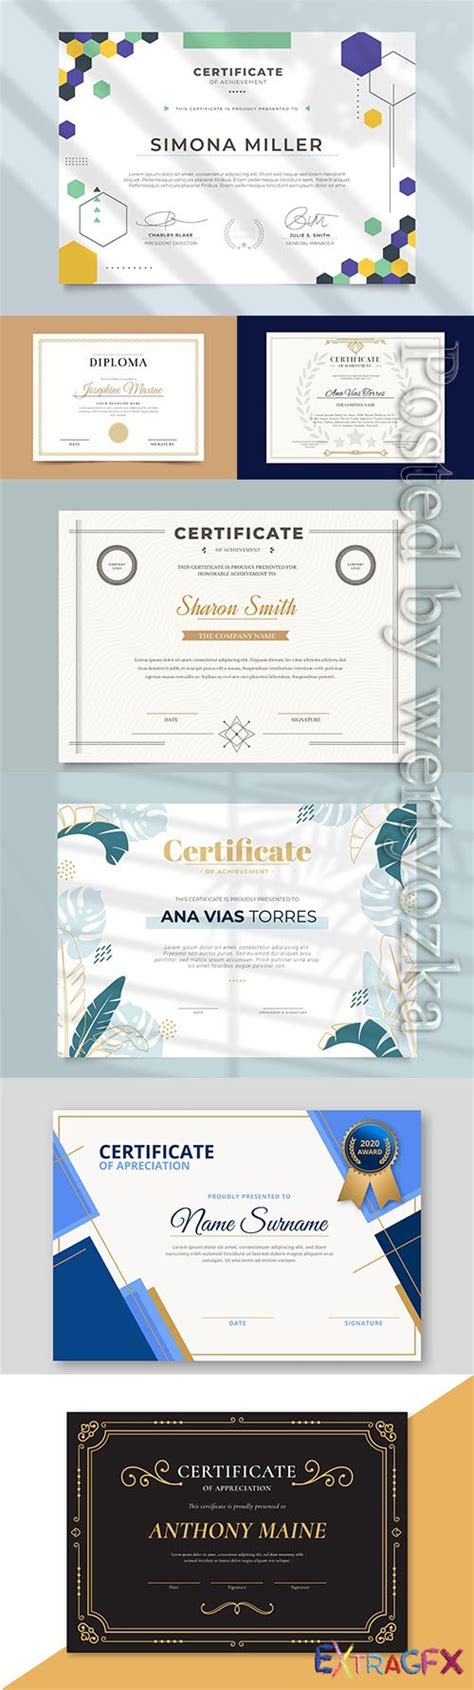 Diplomas And Certificates In Vector Extragfx Free Graphic Portal Psd